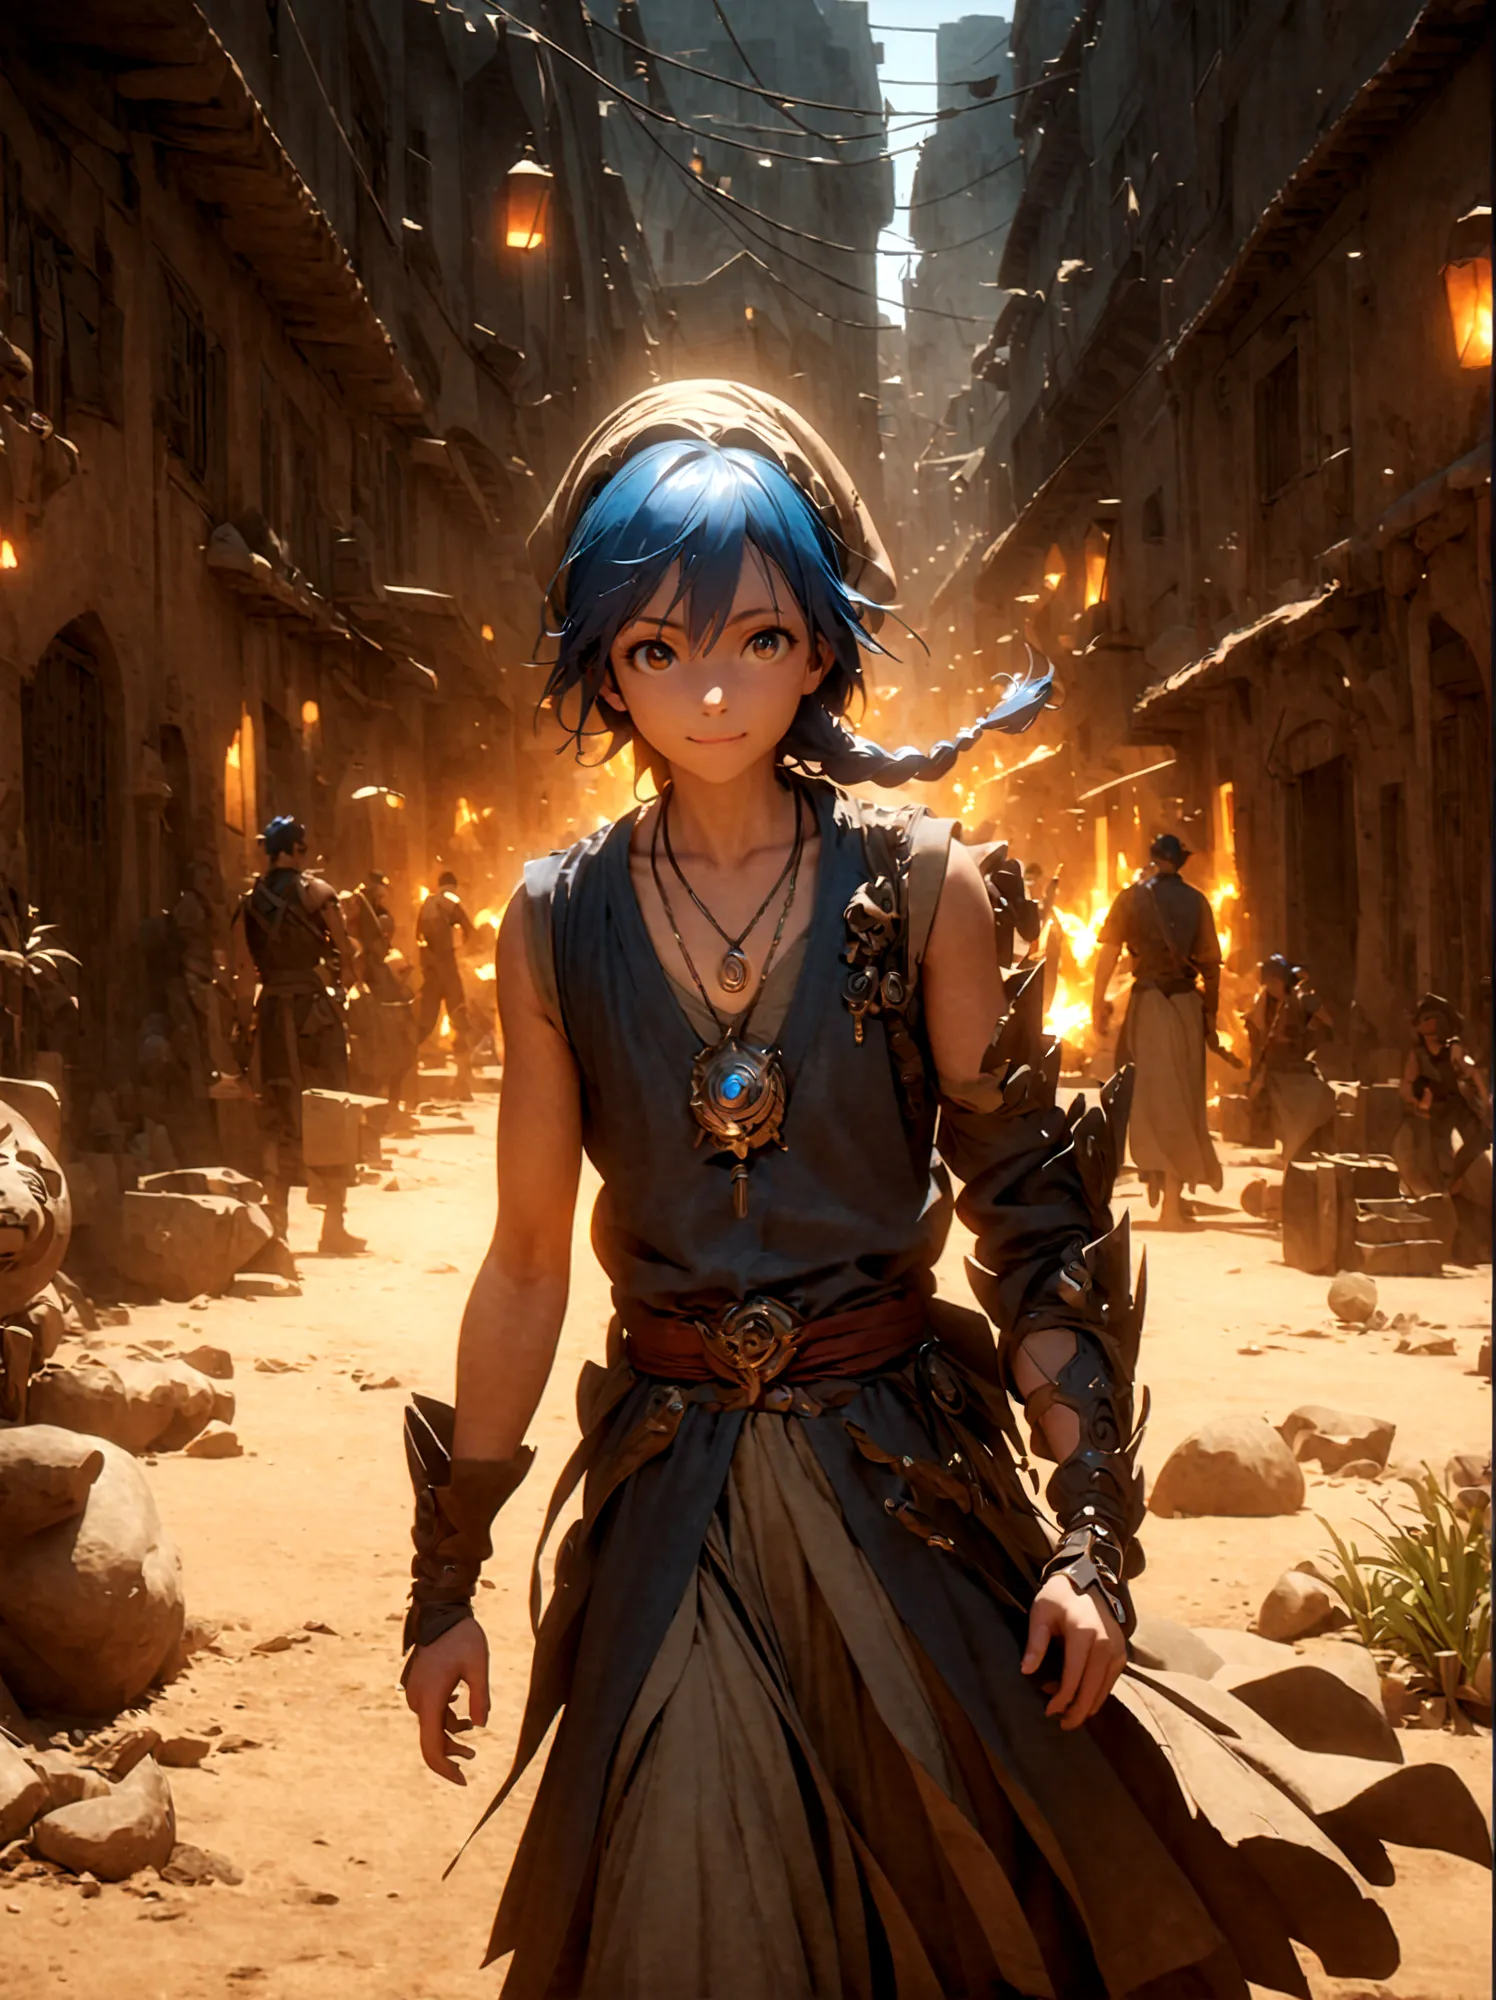 1boy，magi_aladdin，Standing alone in a desert town, He has short blue hair，With a braid，Wear a headscarf，Smiling，A flute pendant ...